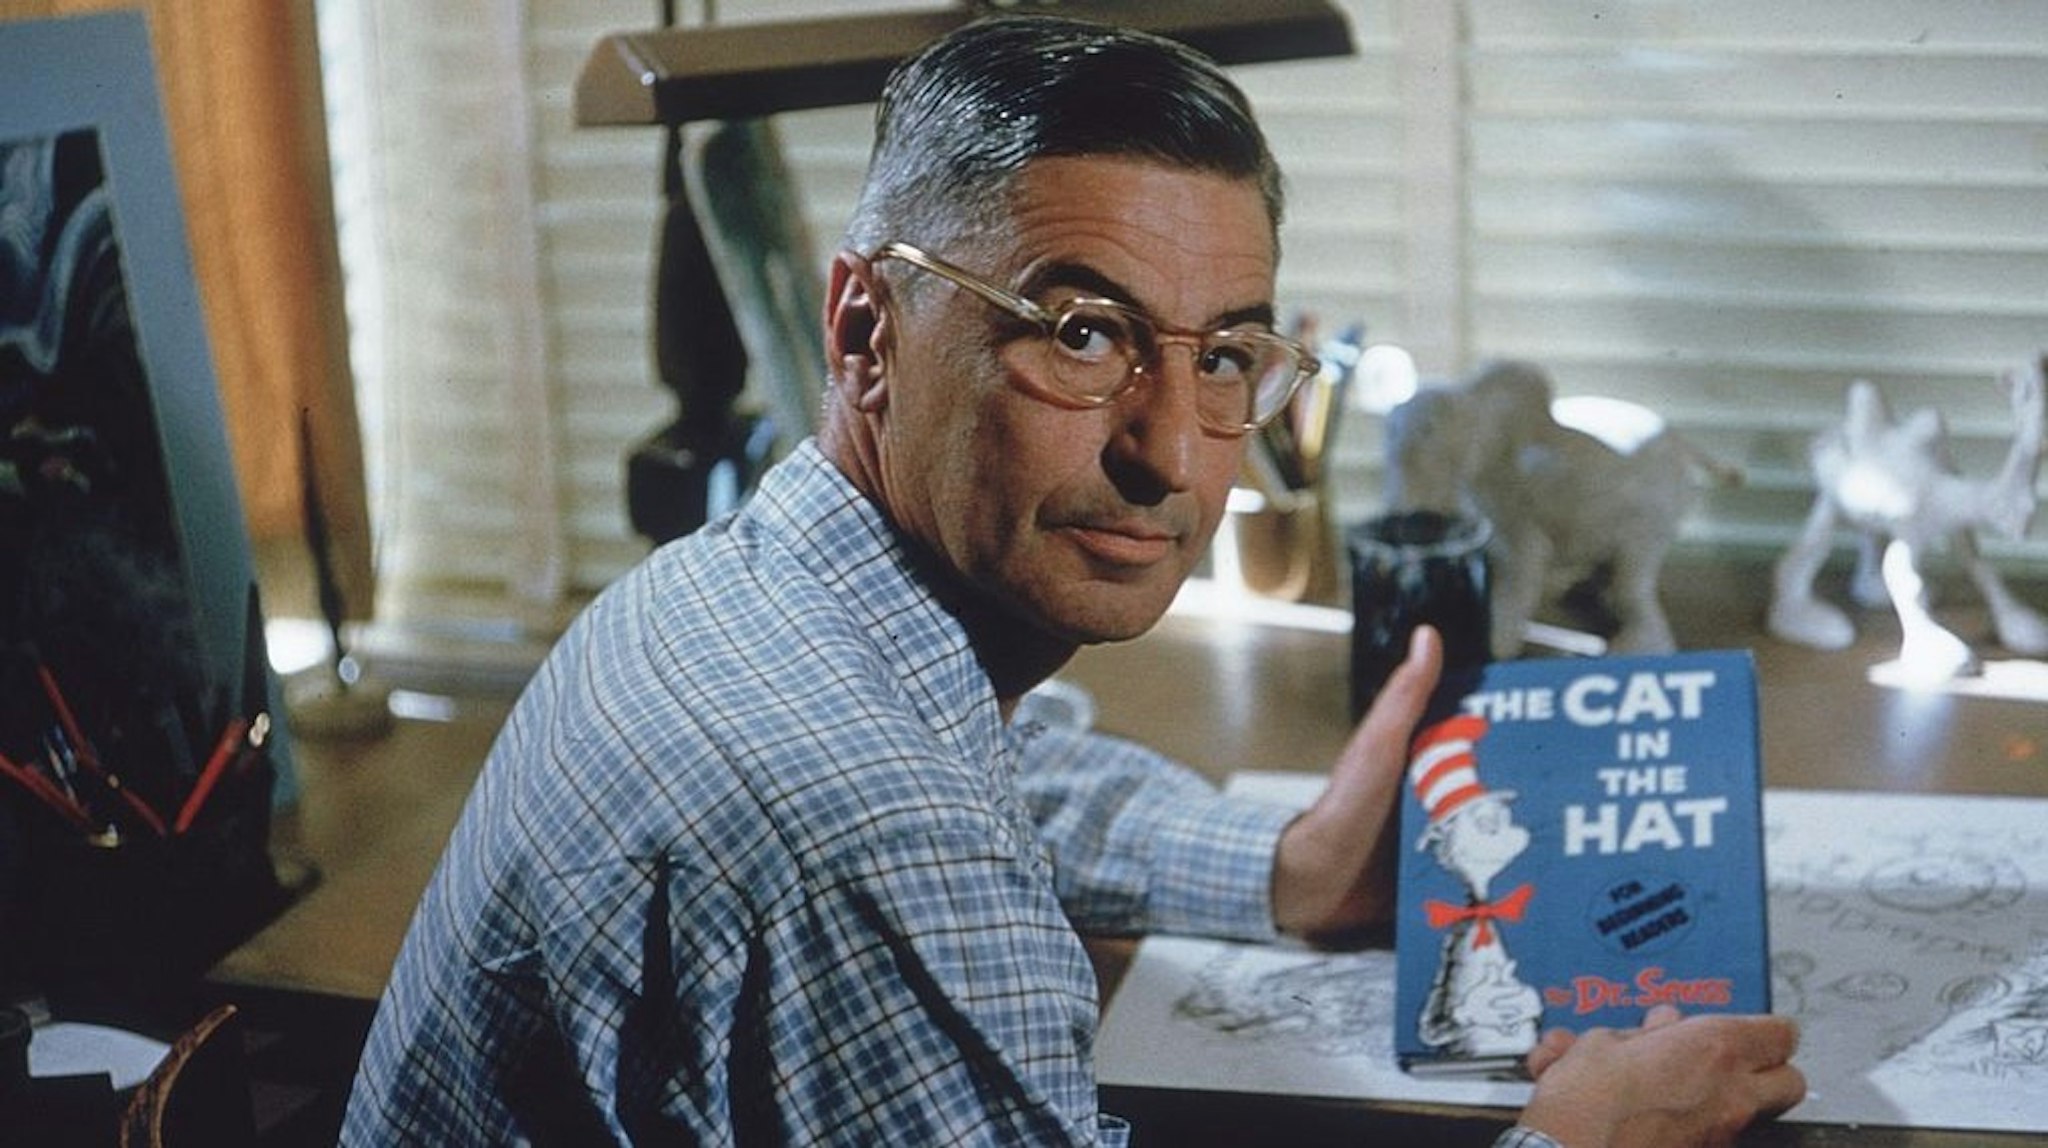 American author and illustrator Dr Seuss (Theodor Seuss Geisel, 1904 - 1991) sits at his drafting table in his home office with a copy of his book, 'The Cat in the Hat', La Jolla, California, April 25, 1957. (Photo by